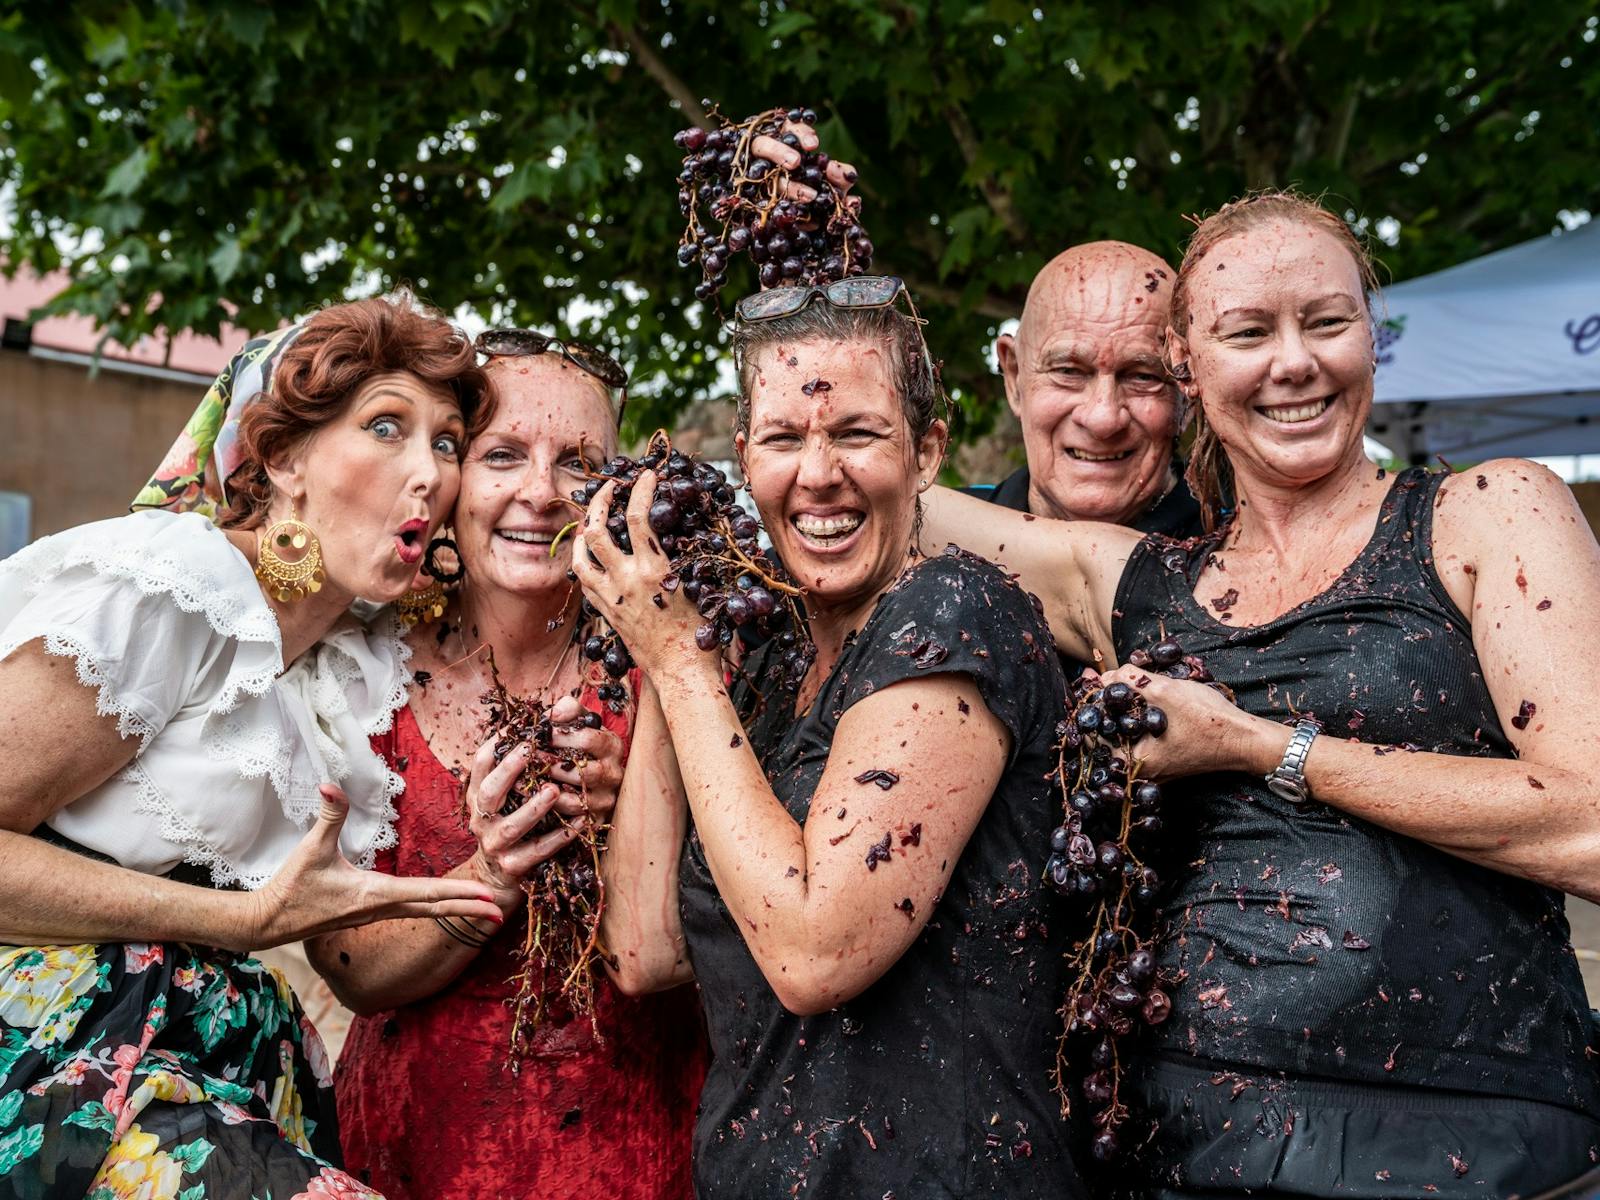 Getting Messy at the Community Grape Stomp